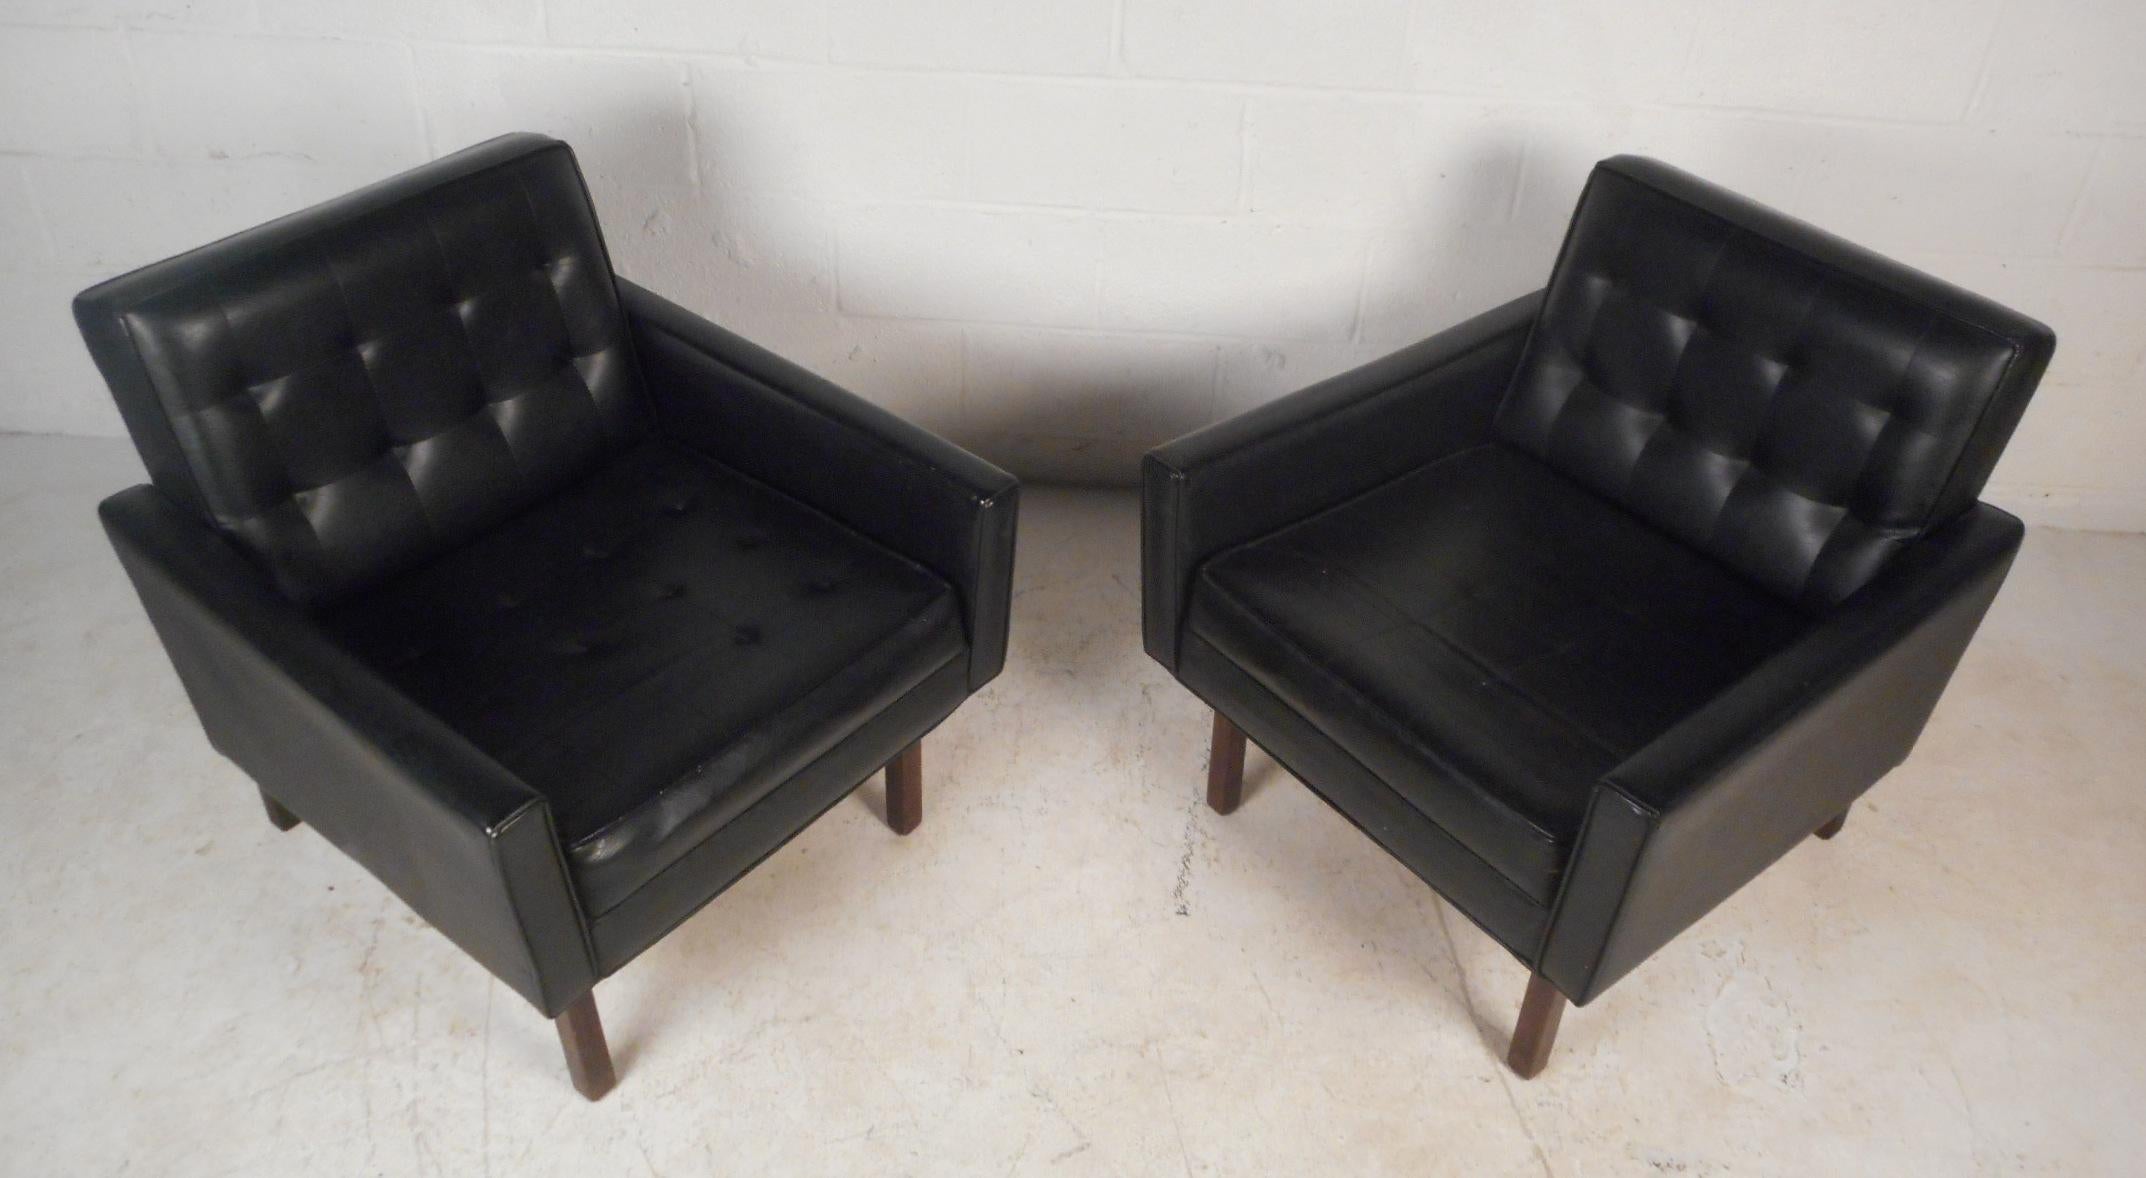 This stunning pair of vintage modern lounge chairs are covered in sleek black vinyl and sit on top of four sturdy walnut legs. A wonderful straight line design with low arm rests, wide back rests, and thick padded seating ensuring plenty of comfort.